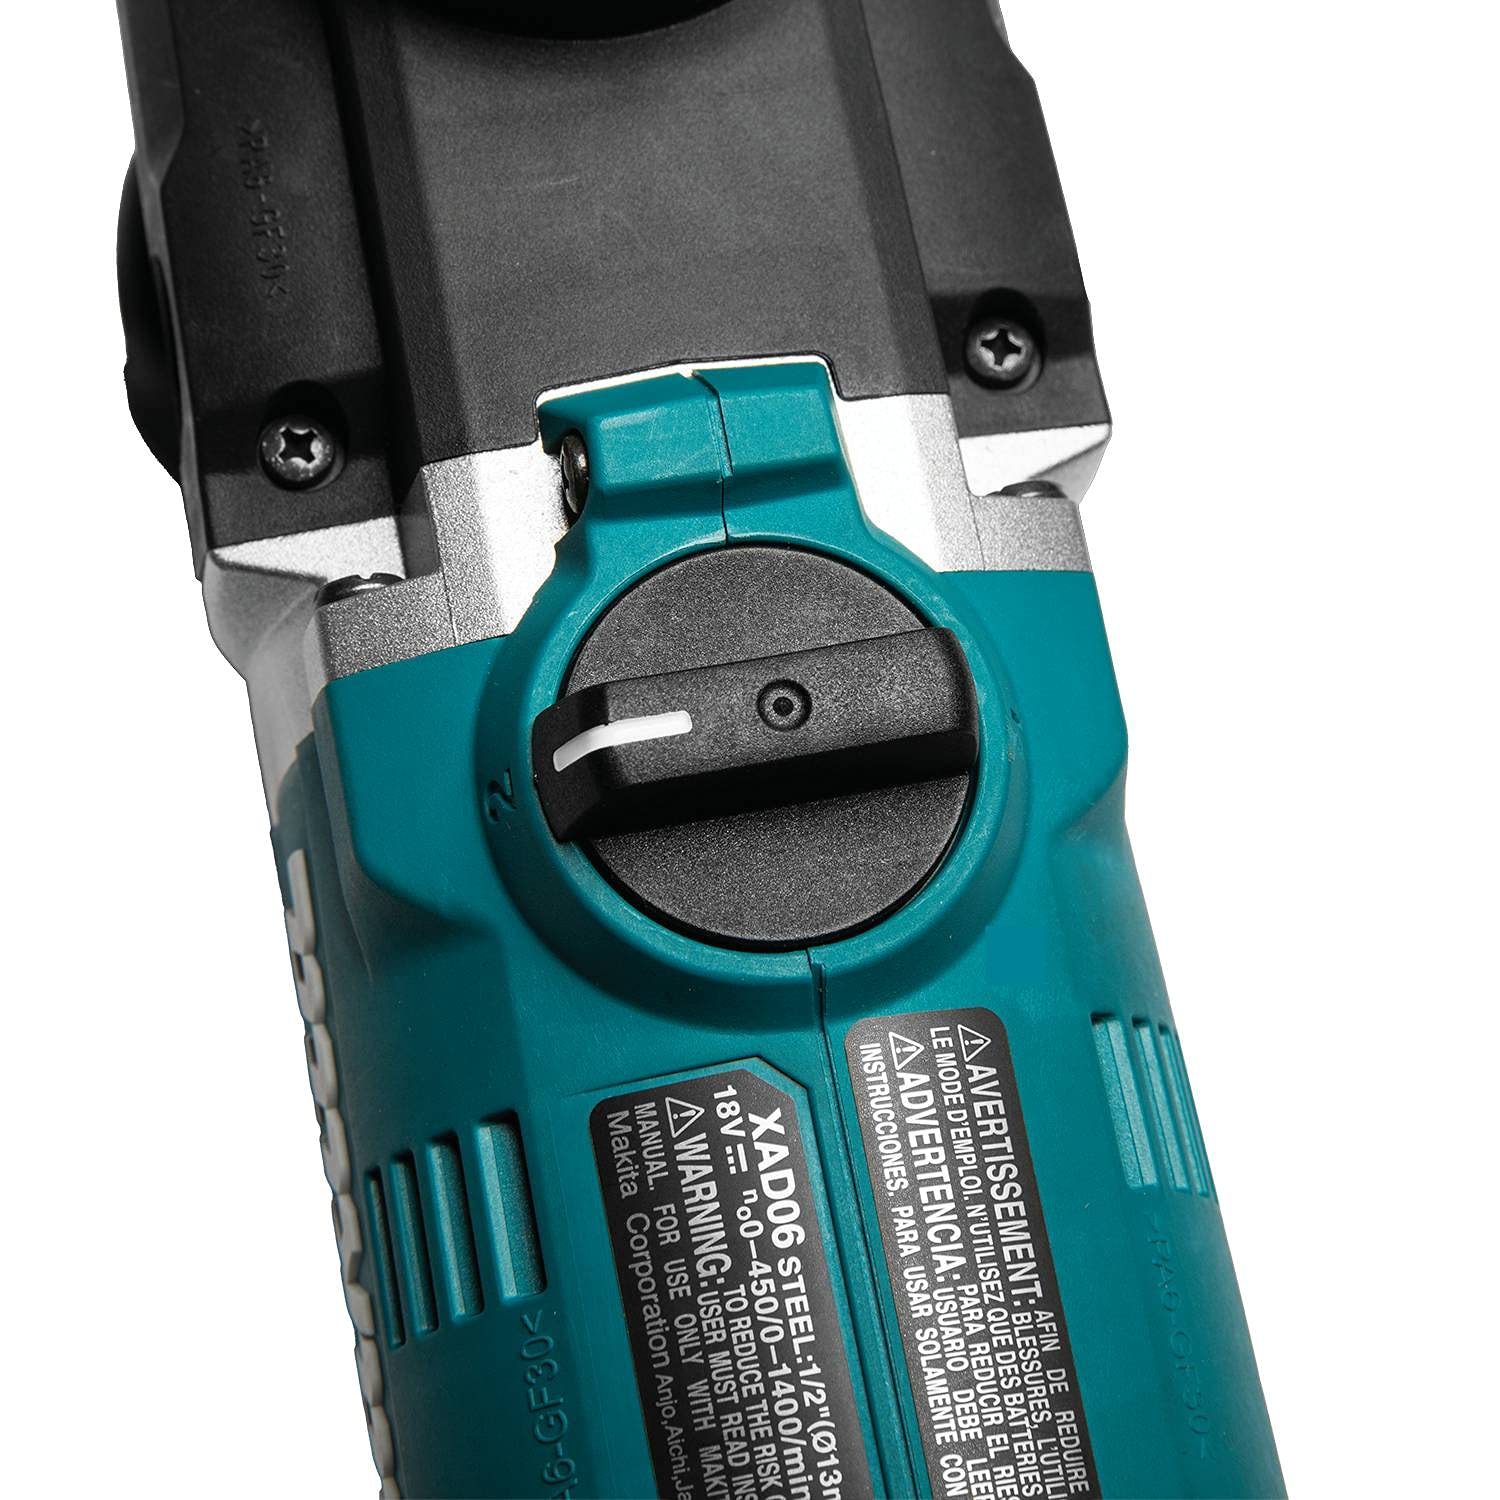 Makita Xad06Z 18V Lxt Lithium-Ion Brushless and 50 similar items